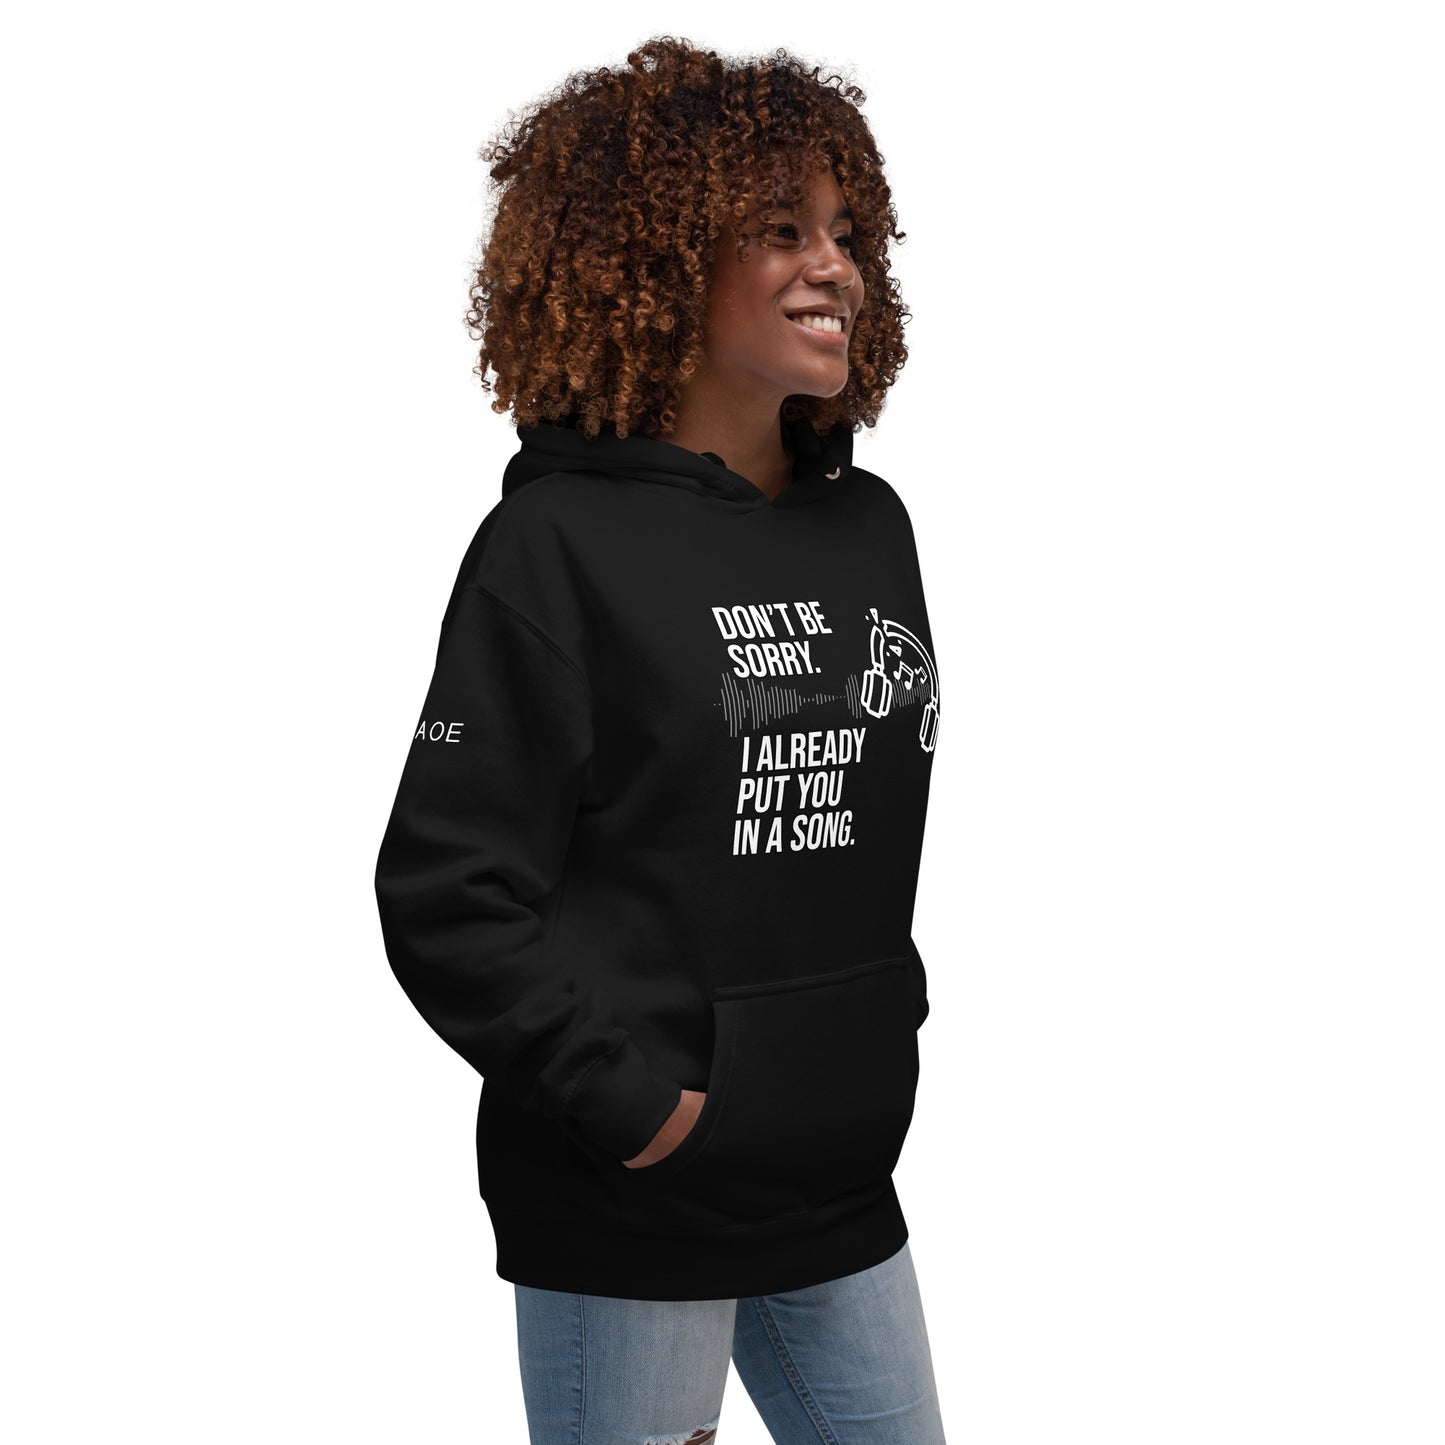 I Bet You Think This Song Is About You - Unisex Hoodie